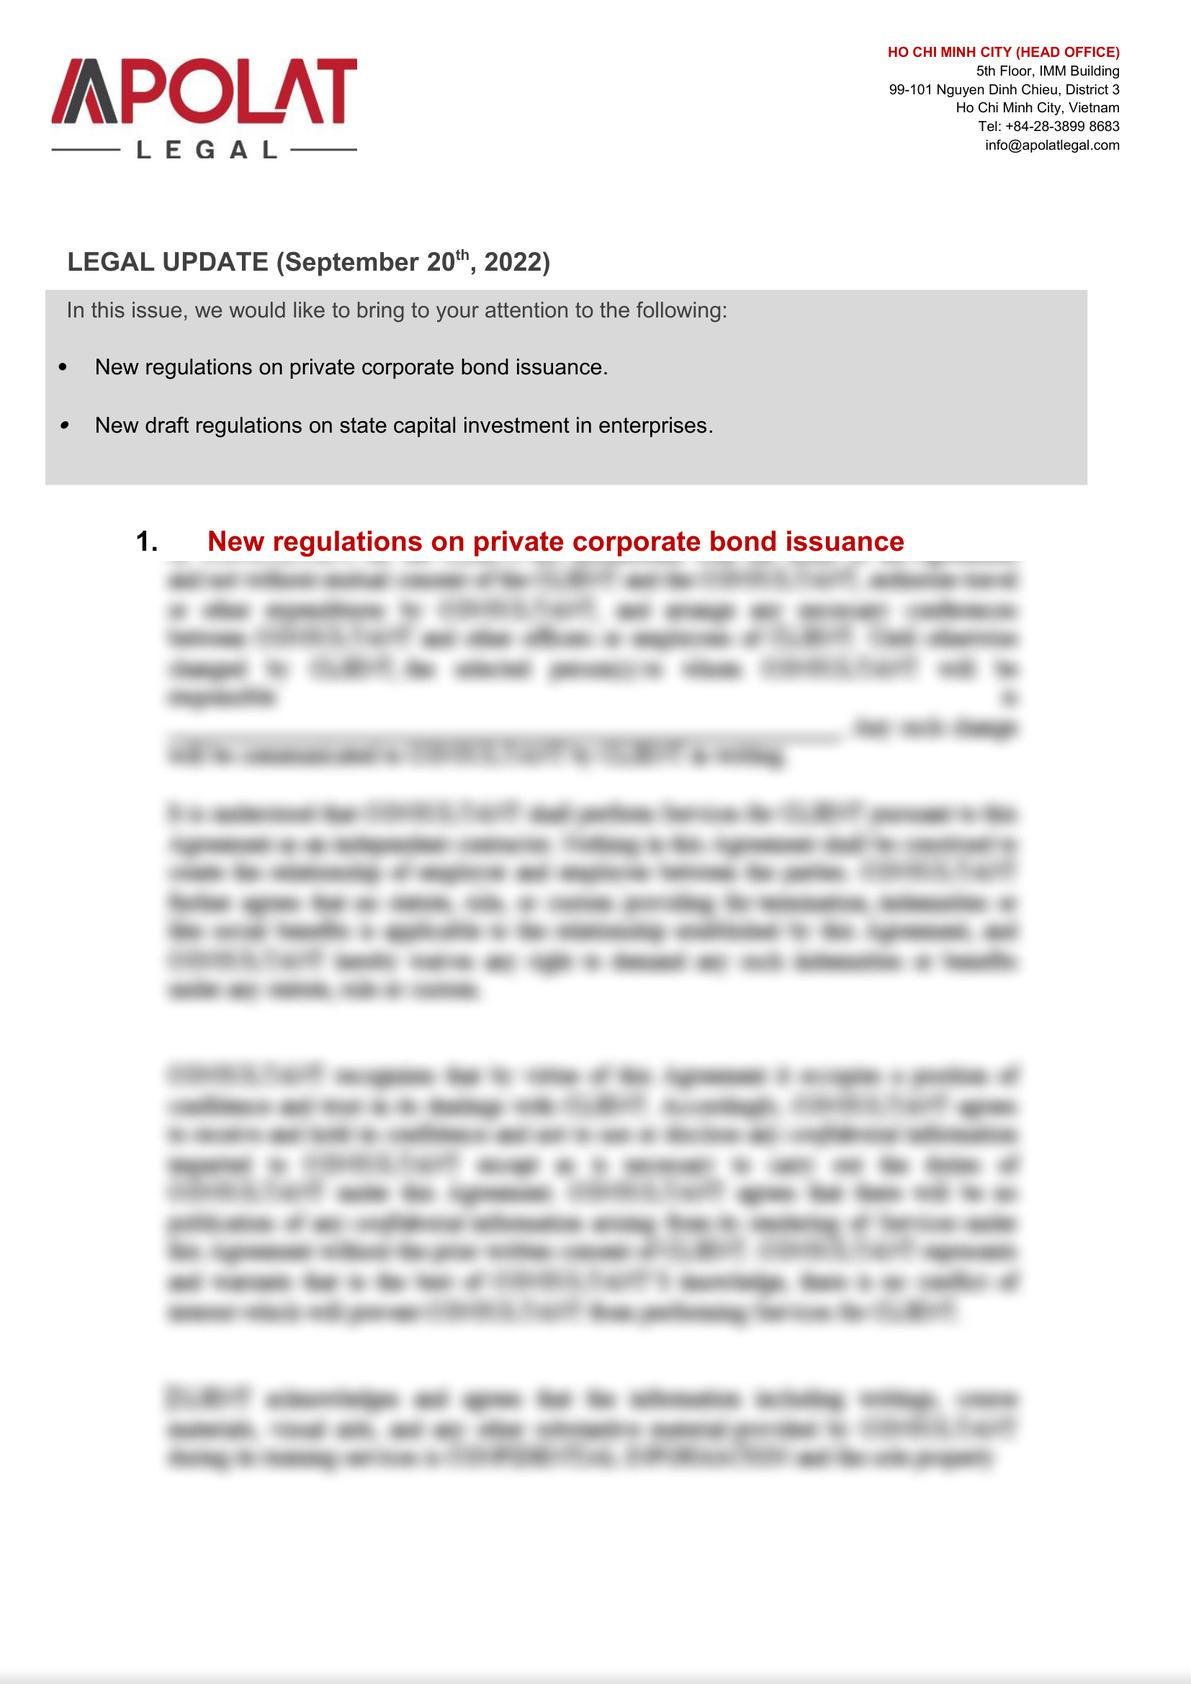 Legal update: New regulations on private corporate bond issuance -0